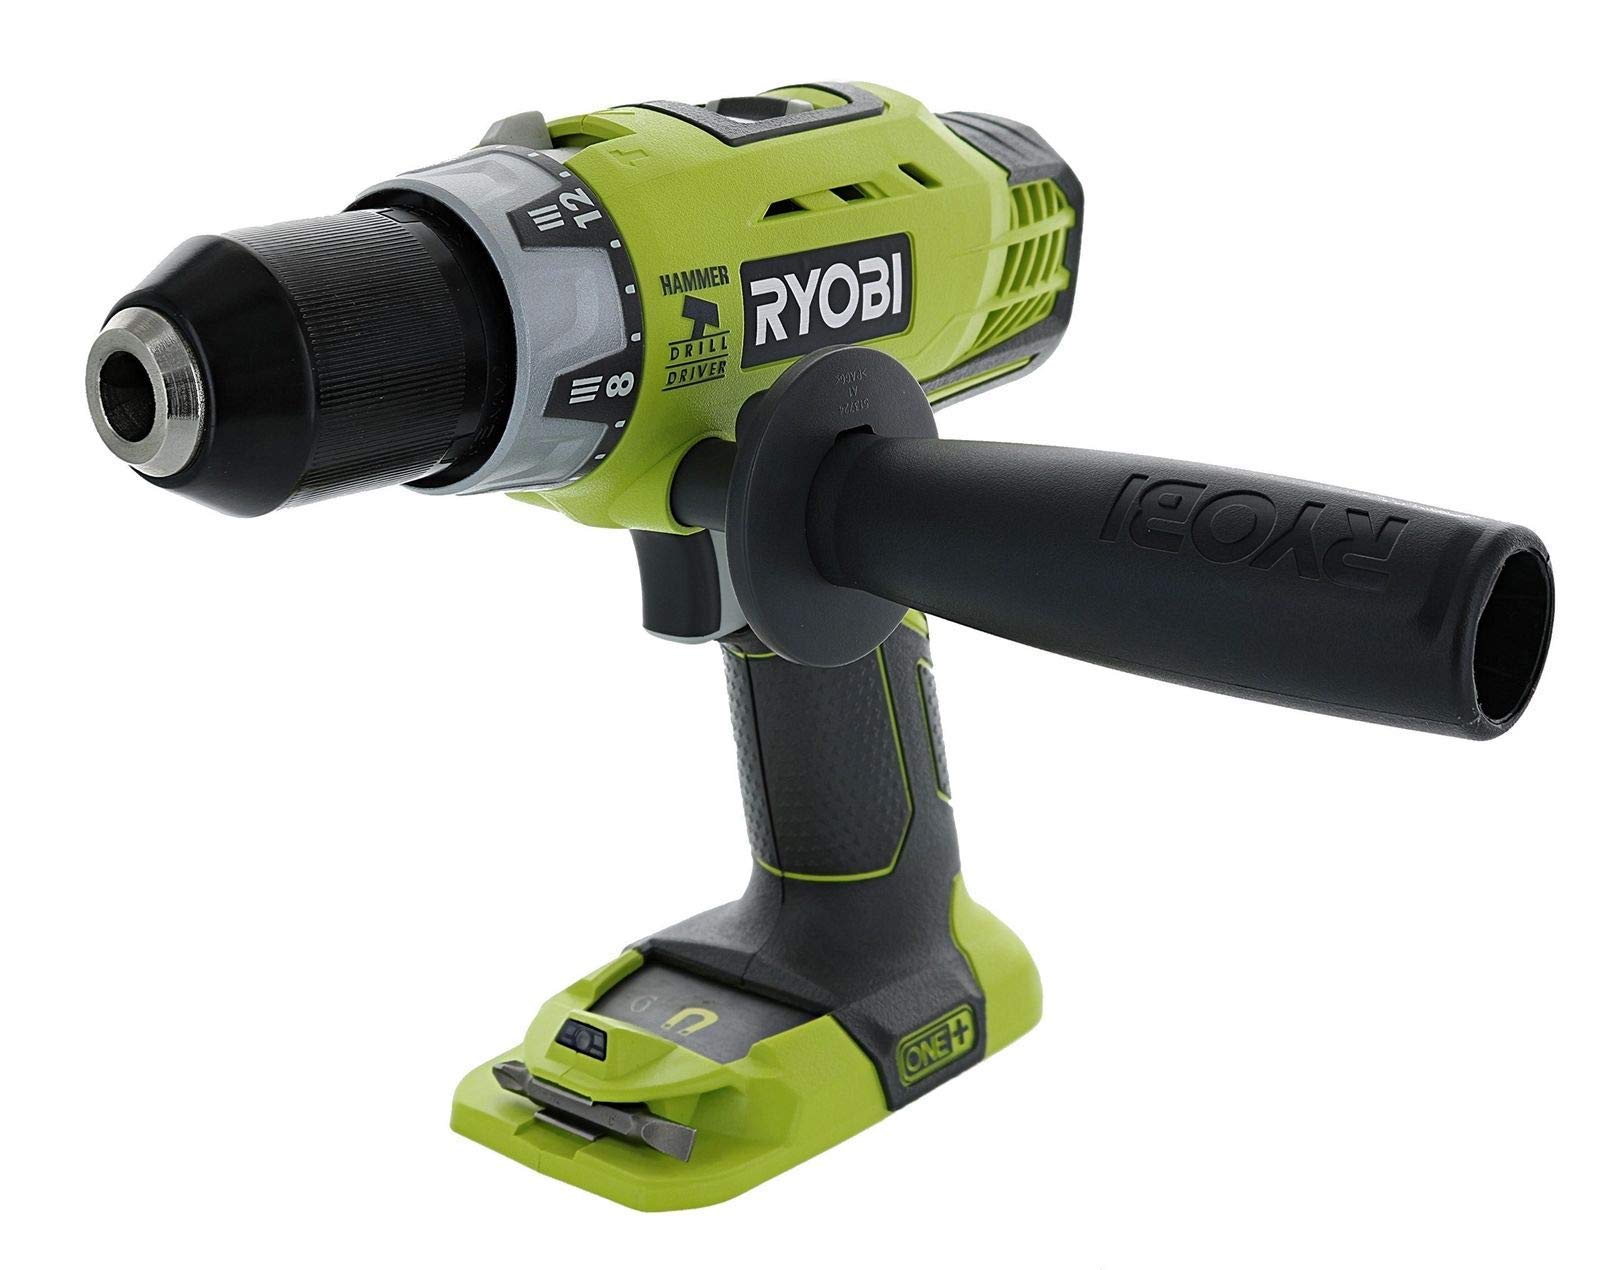 Home Depot - Ryobi P214 One+ 18V Hammer Drill/Driver (Tool Only) with Handle -$25 YMMV